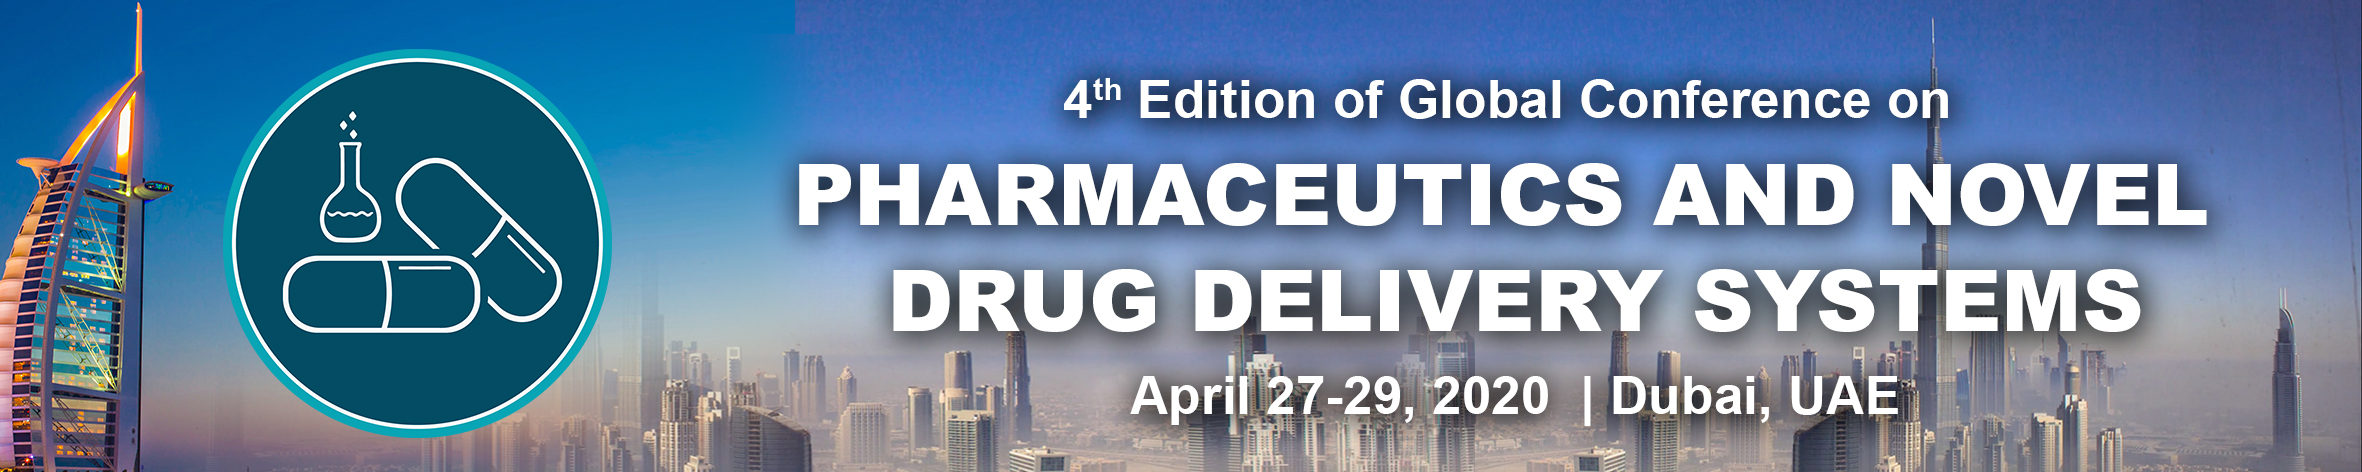 4th Edition of Global Conference on Pharmaceutics and Novel Drug Delivery Systems, Dubai, United Arab Emirates